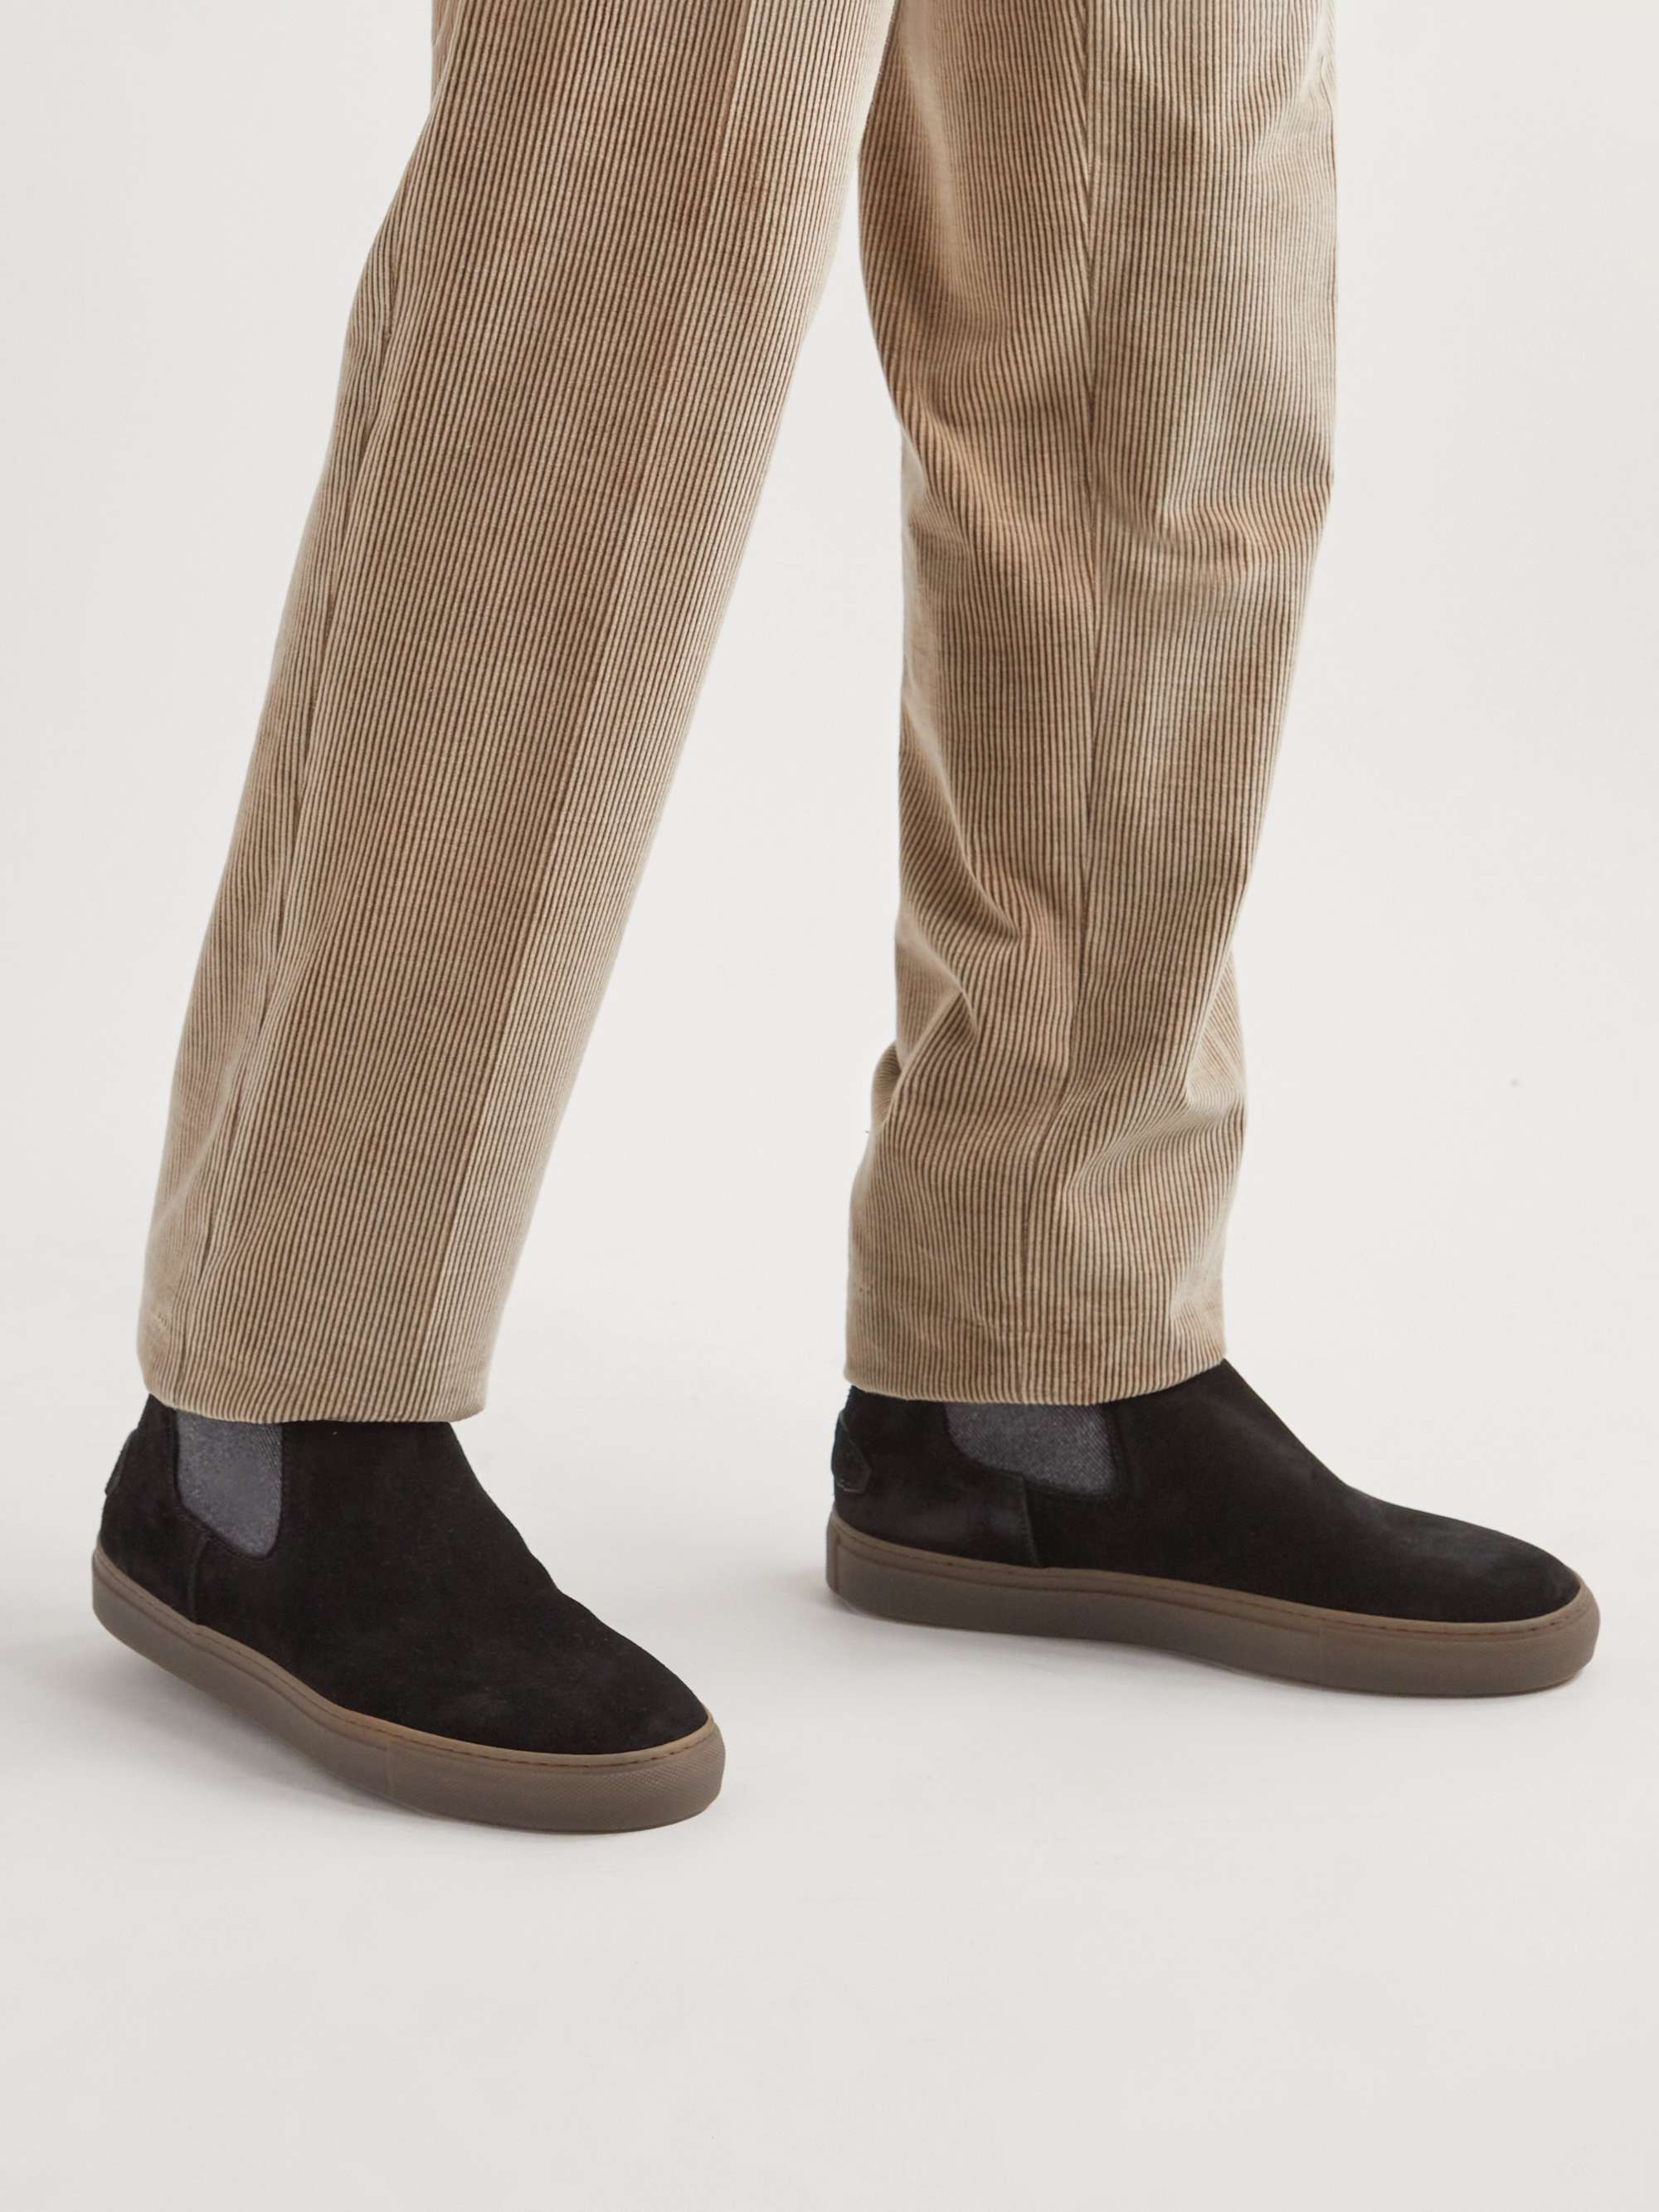 BRIONI Shearling-Lined Suede Chelsea Boots | MR PORTER